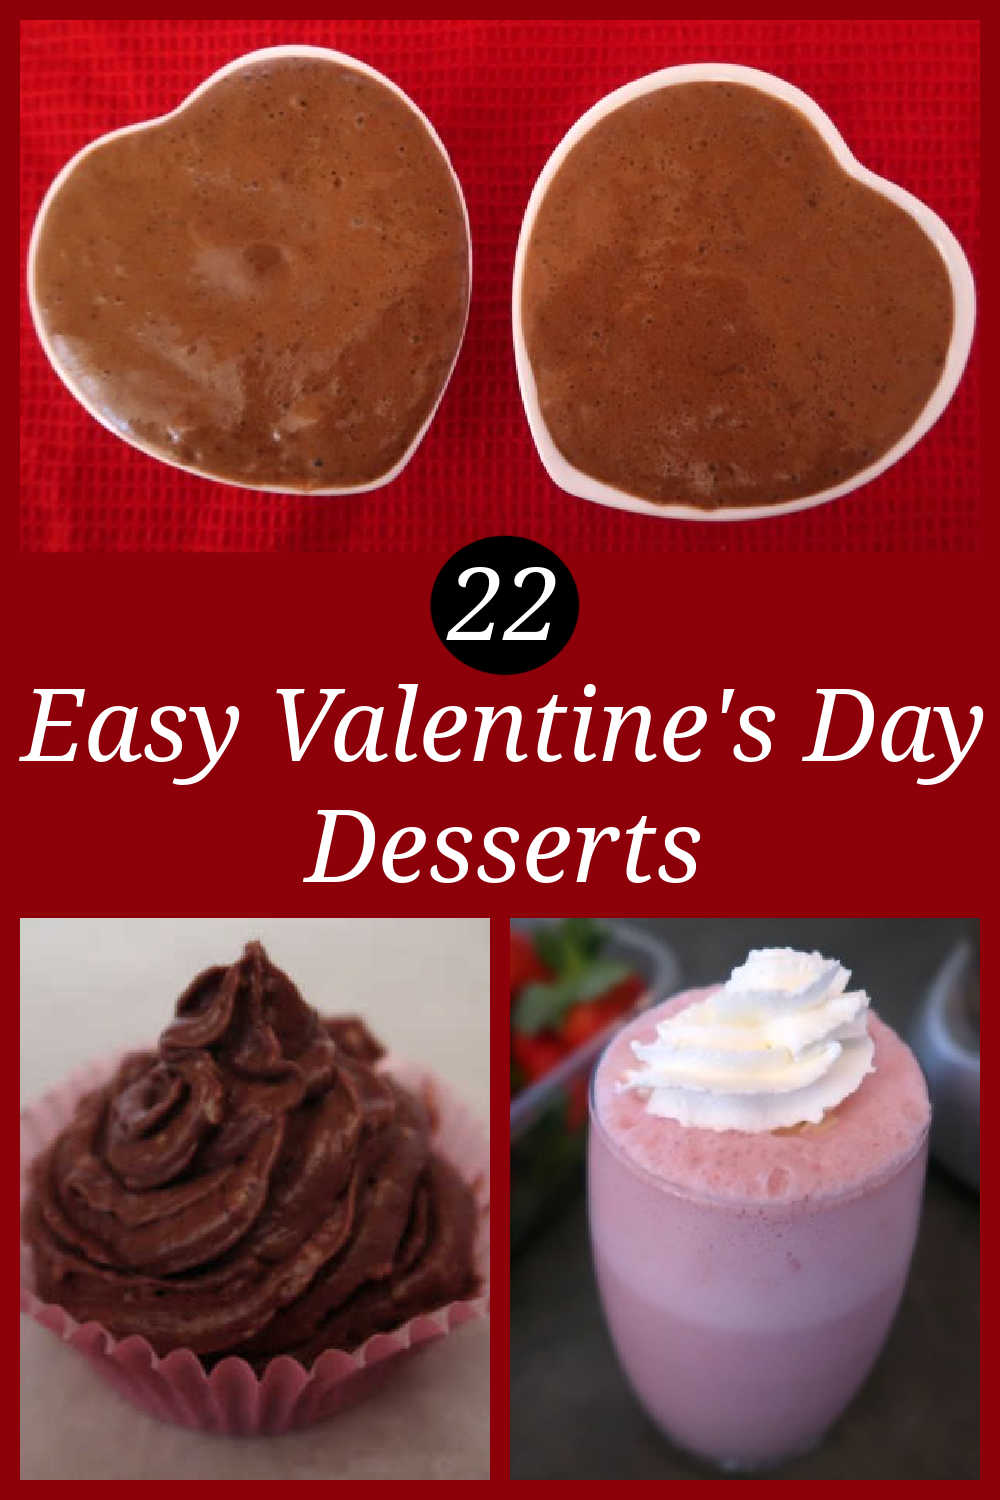 22 Easy Valentine Desserts - Ideas for the best decadent sweet treat recipes for your Valentine's Day on February 14th.